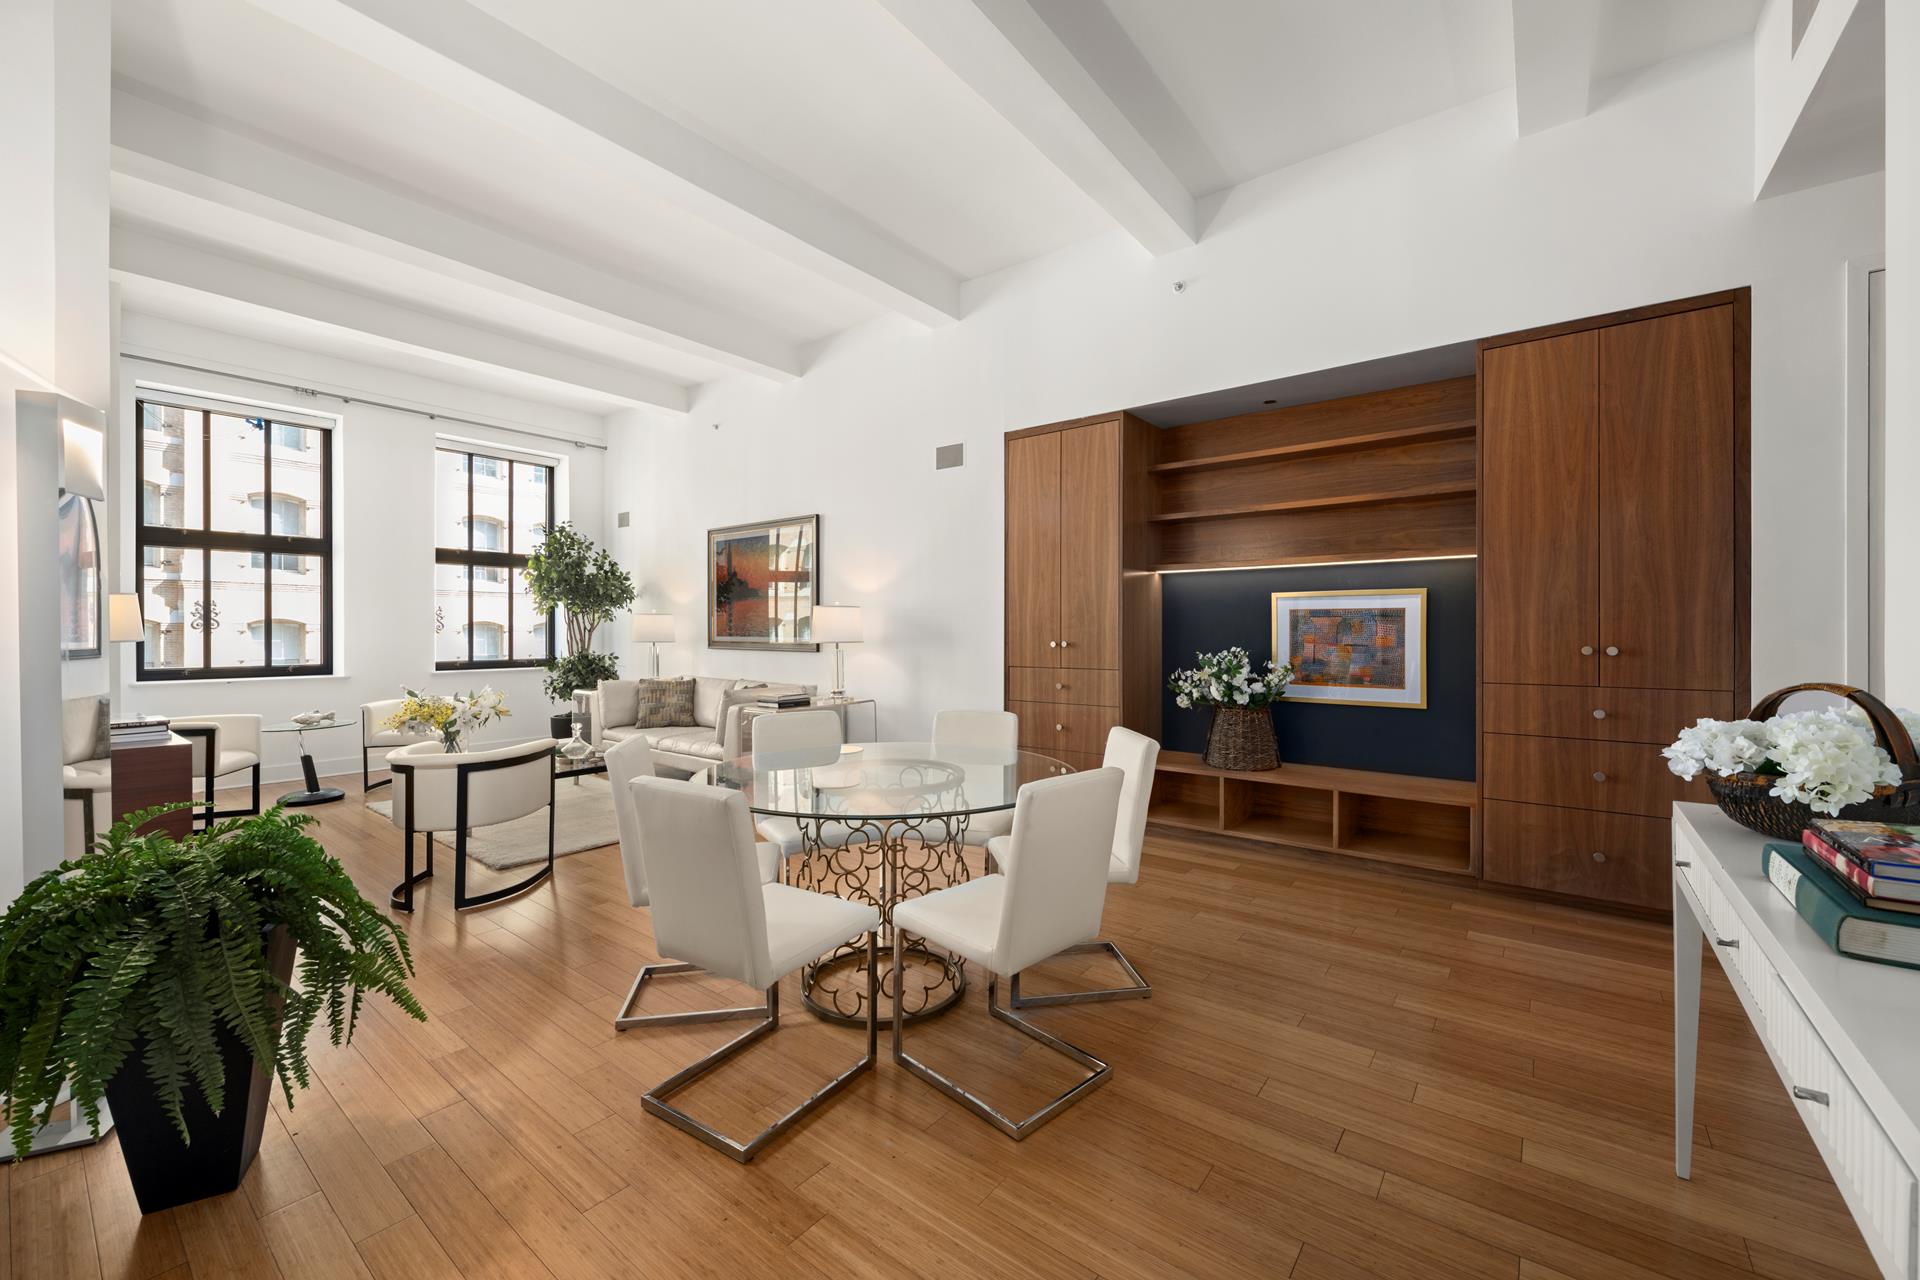 415 Greenwich Street 4B, Tribeca, Downtown, NYC - 3 Bedrooms  
4 Bathrooms  
5 Rooms - 